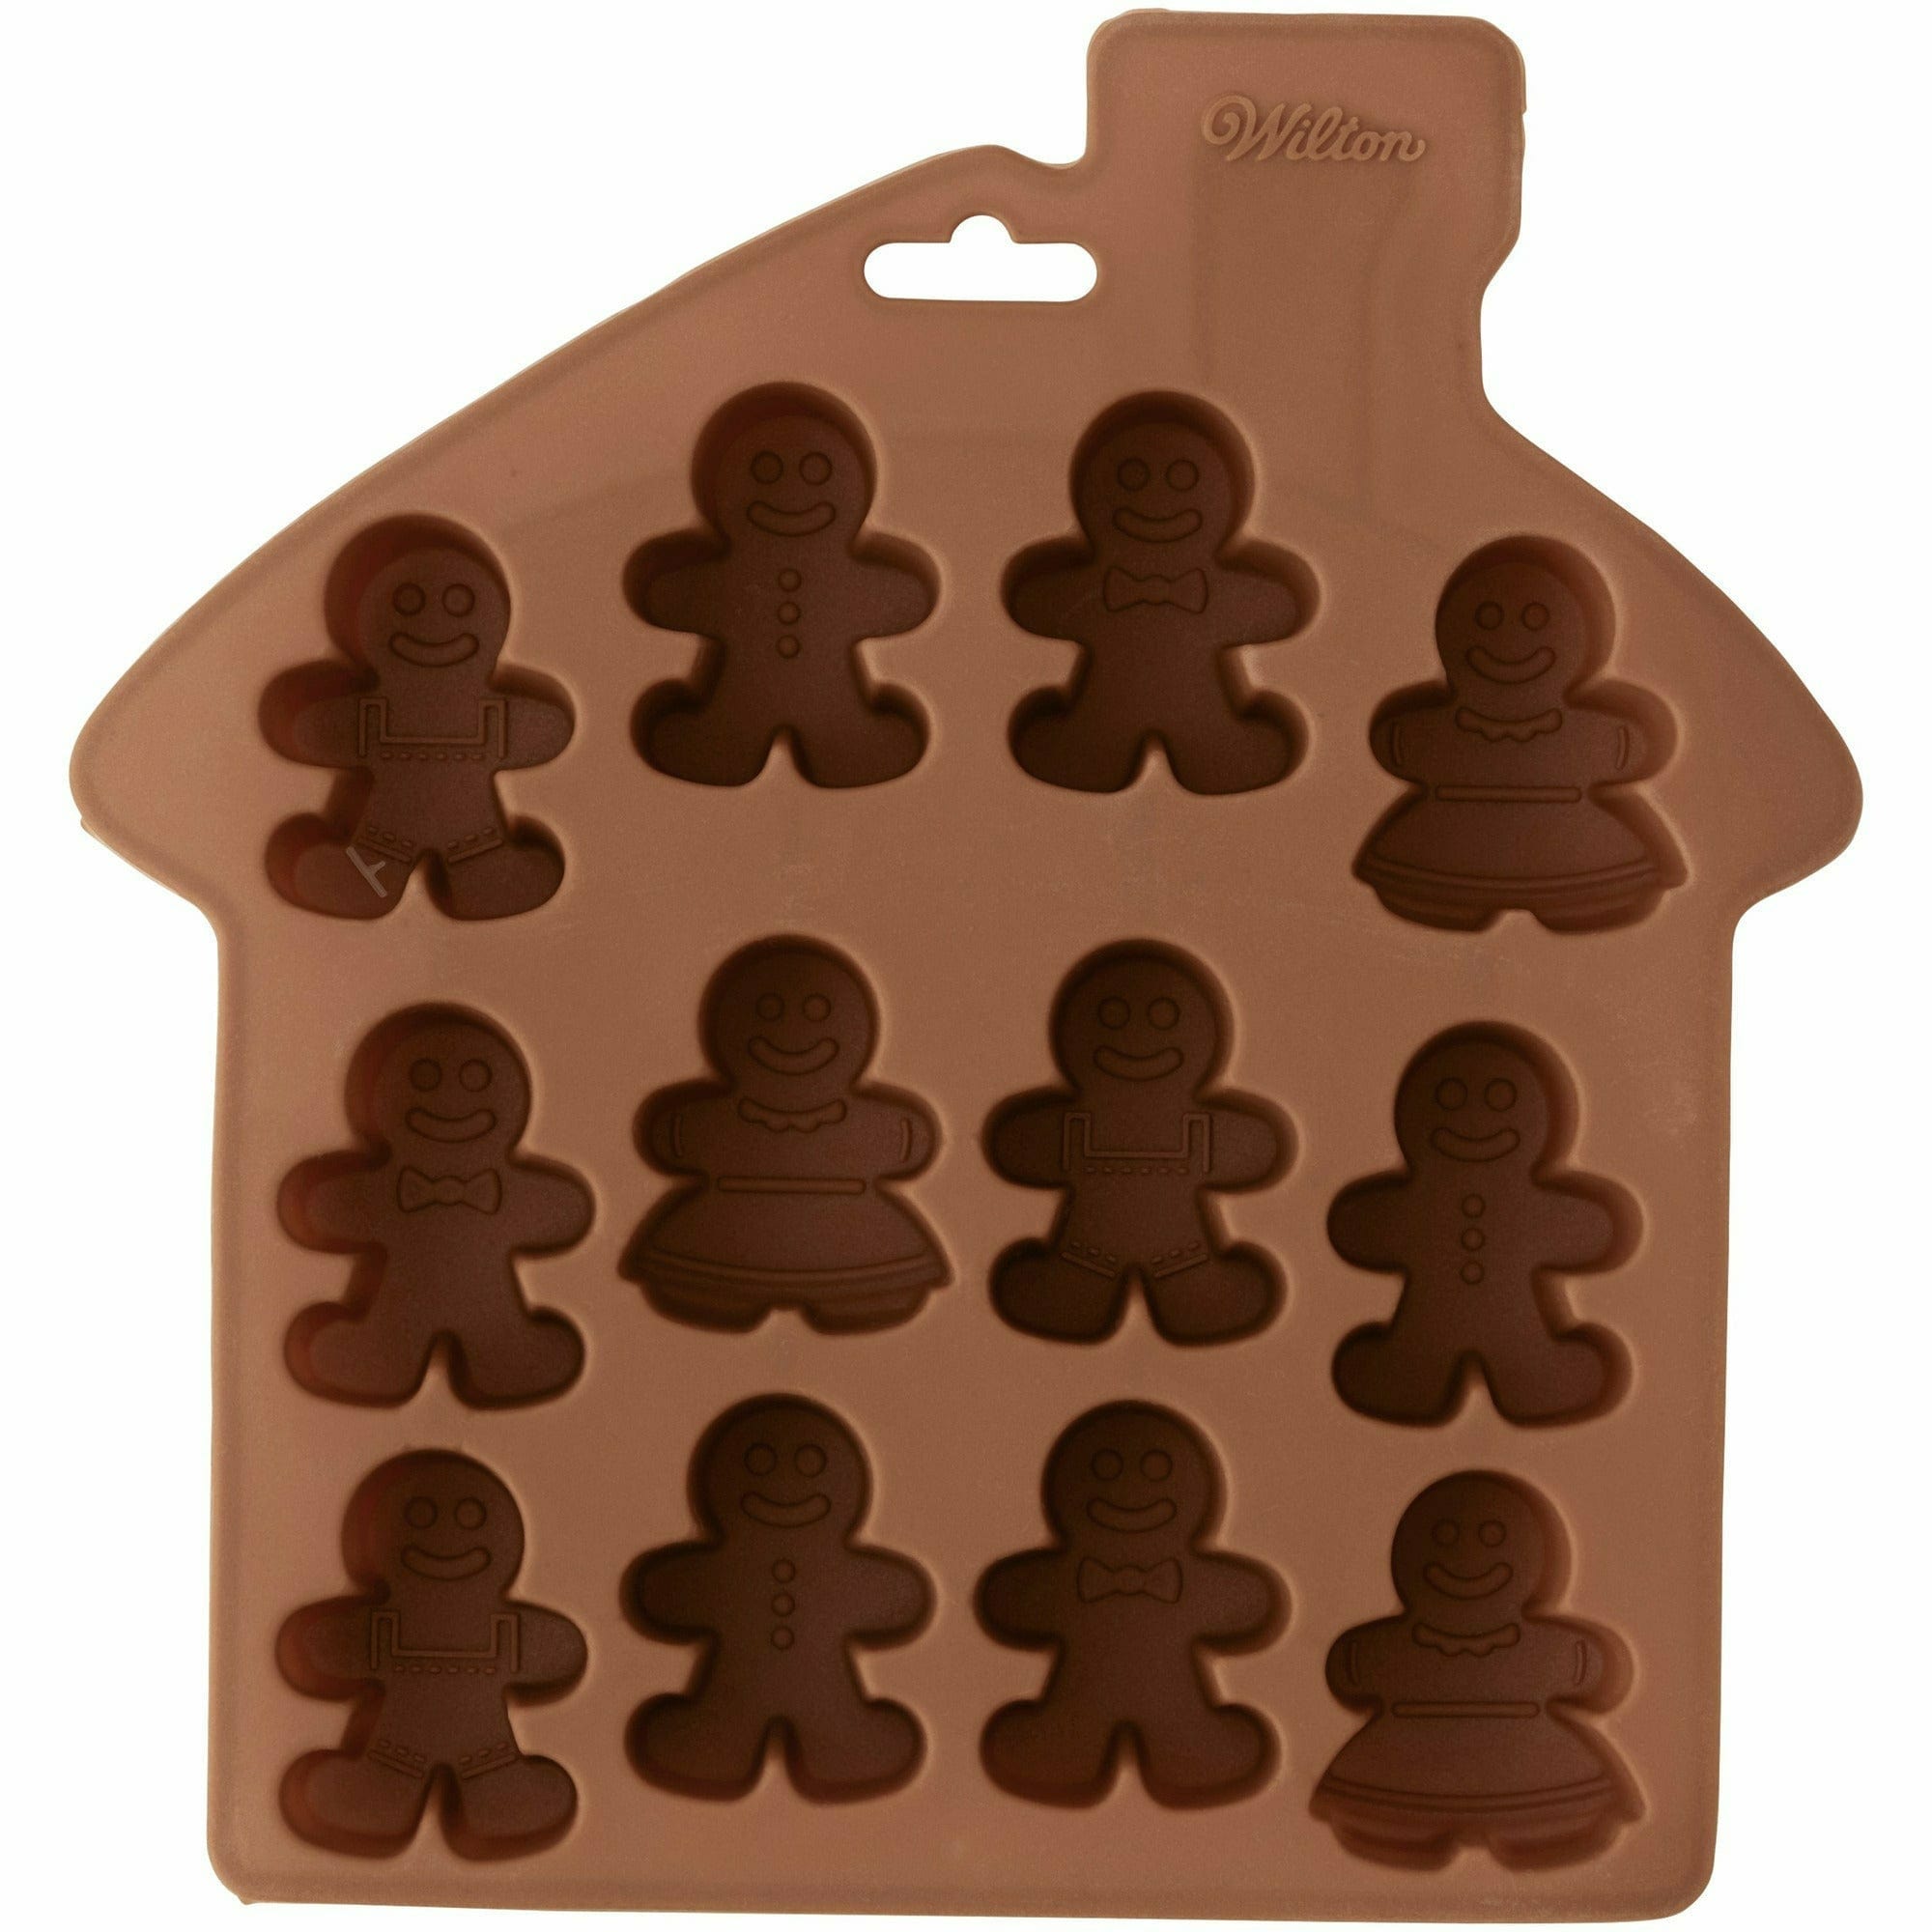 Ultimate Party Super Stores HOLIDAY: CHRISTMAS Silicone Gingerbread People Bite-Size Treat Mold